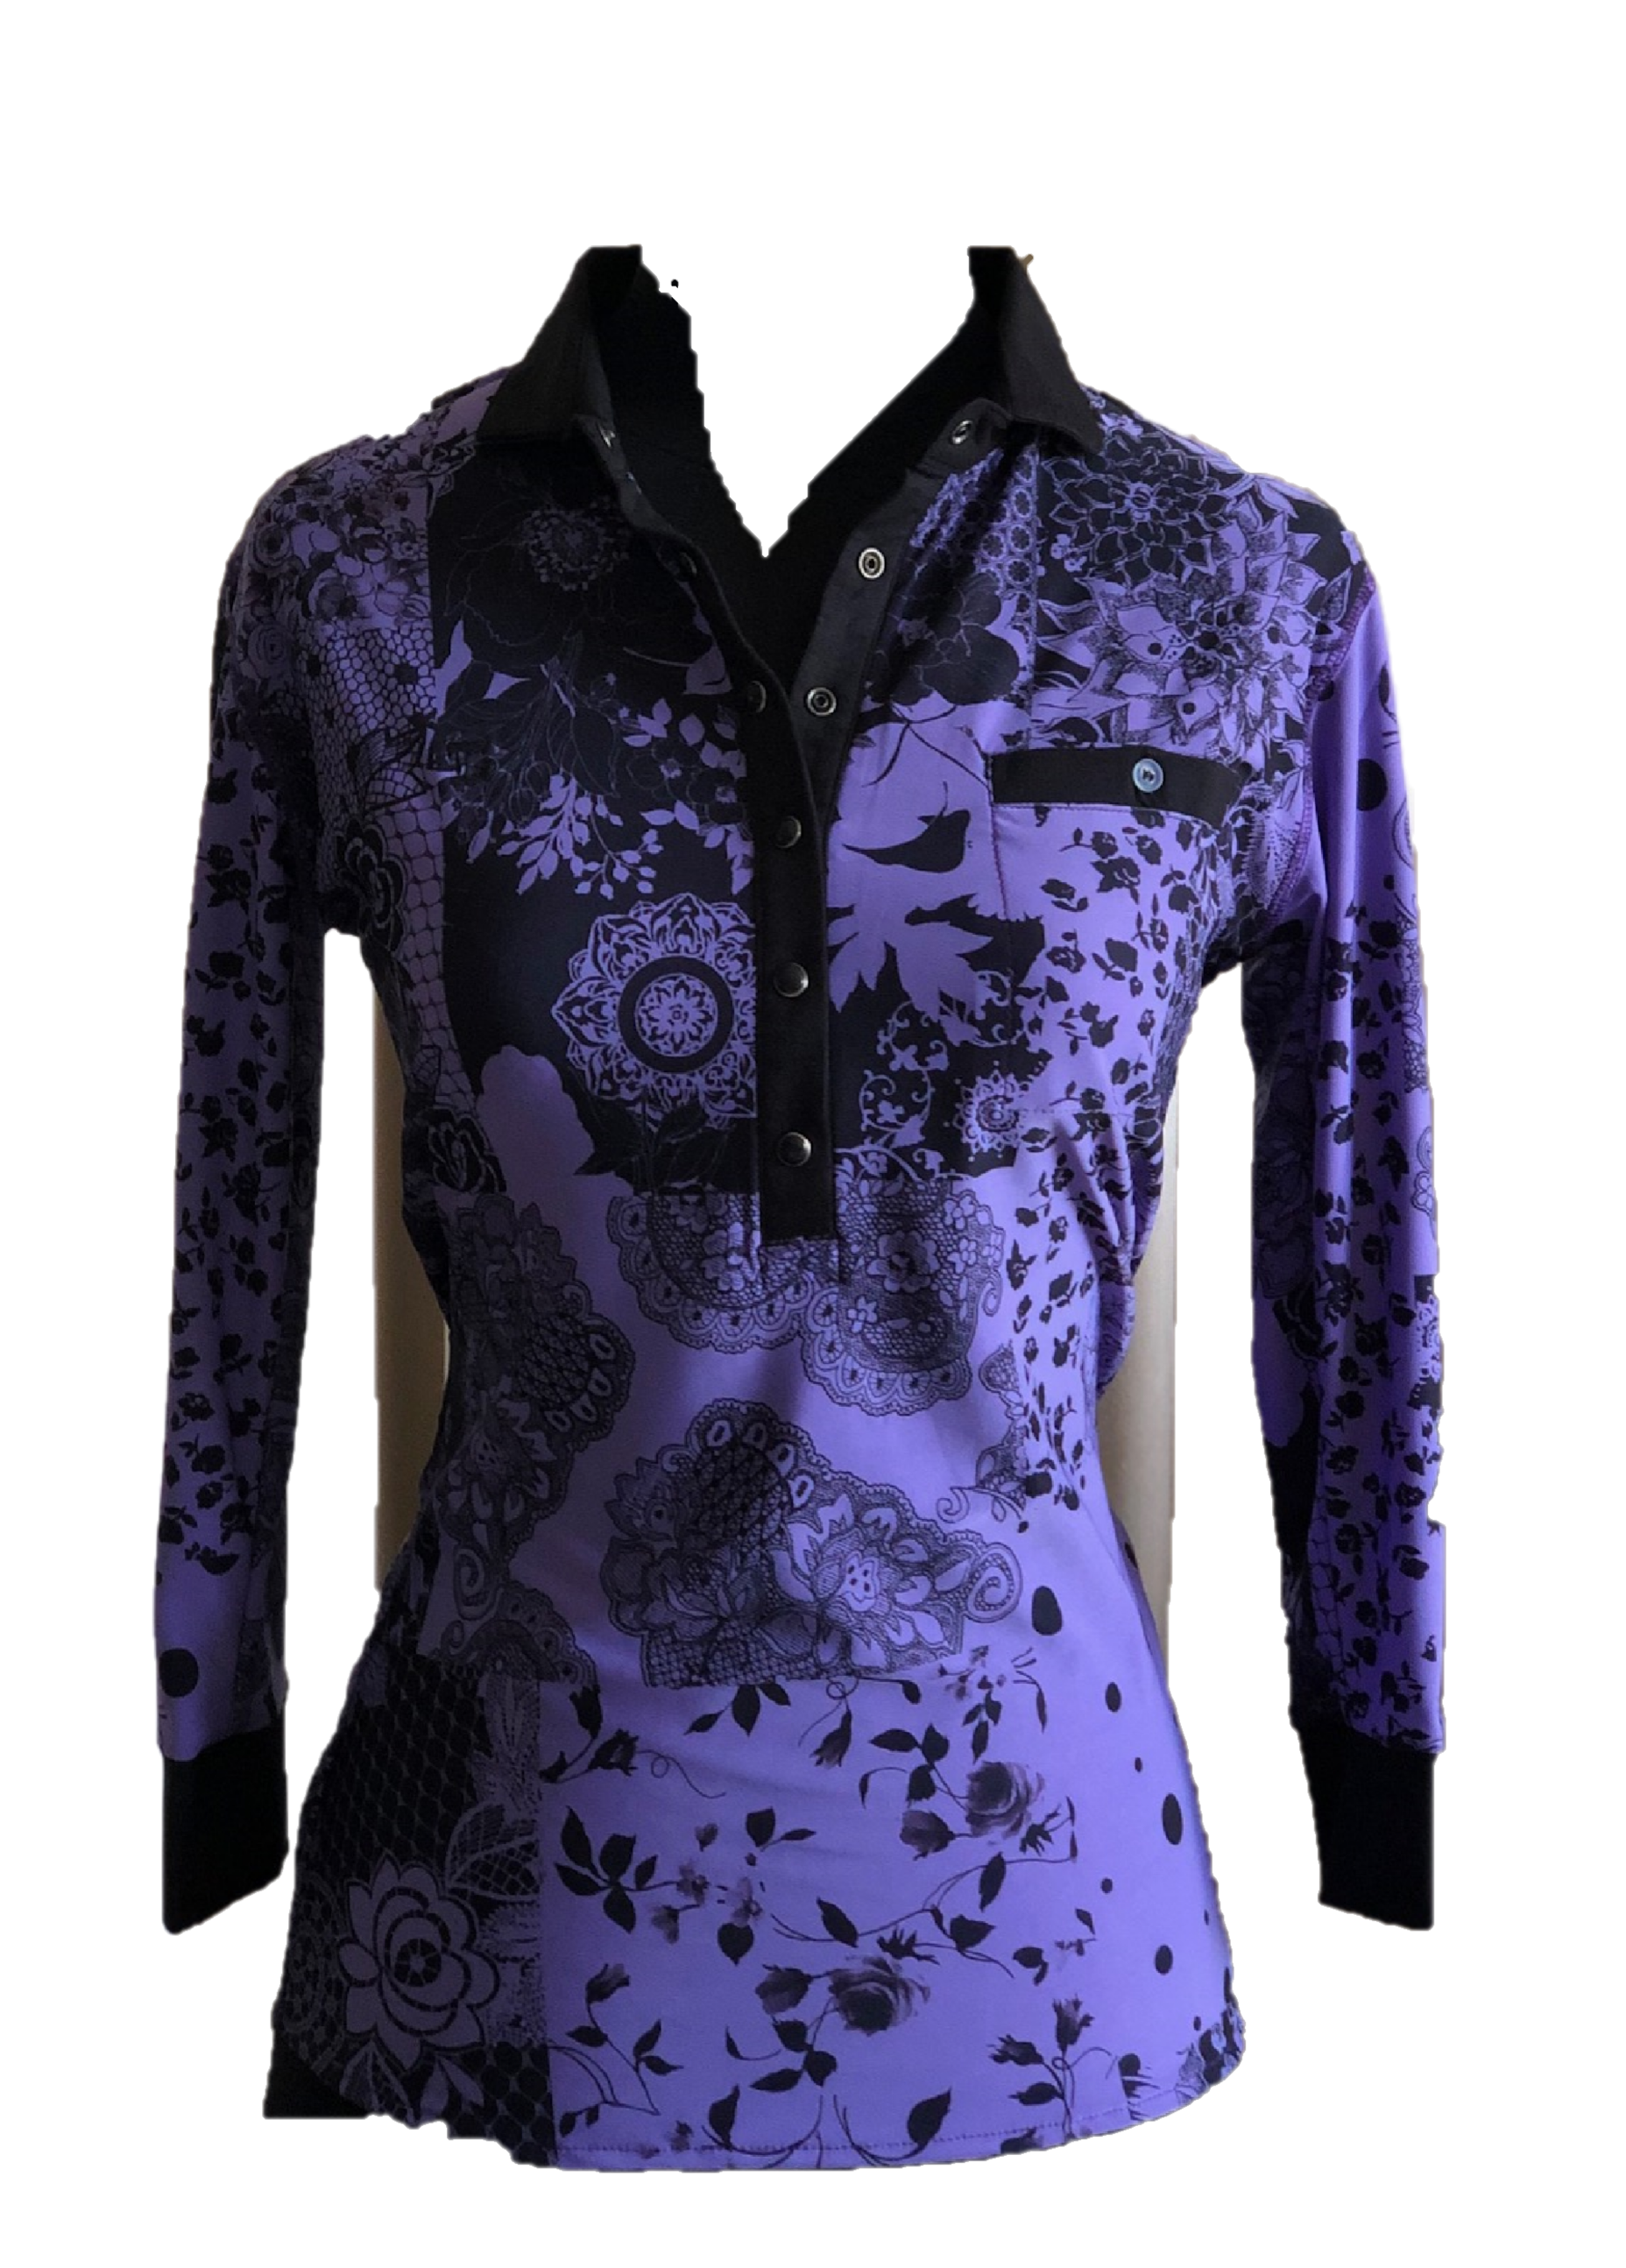 LT-090C || Ladies Top Purple with Black Flower Batik and  Black  Trim 3/4 Sleeves and Snap Pearl Buttons